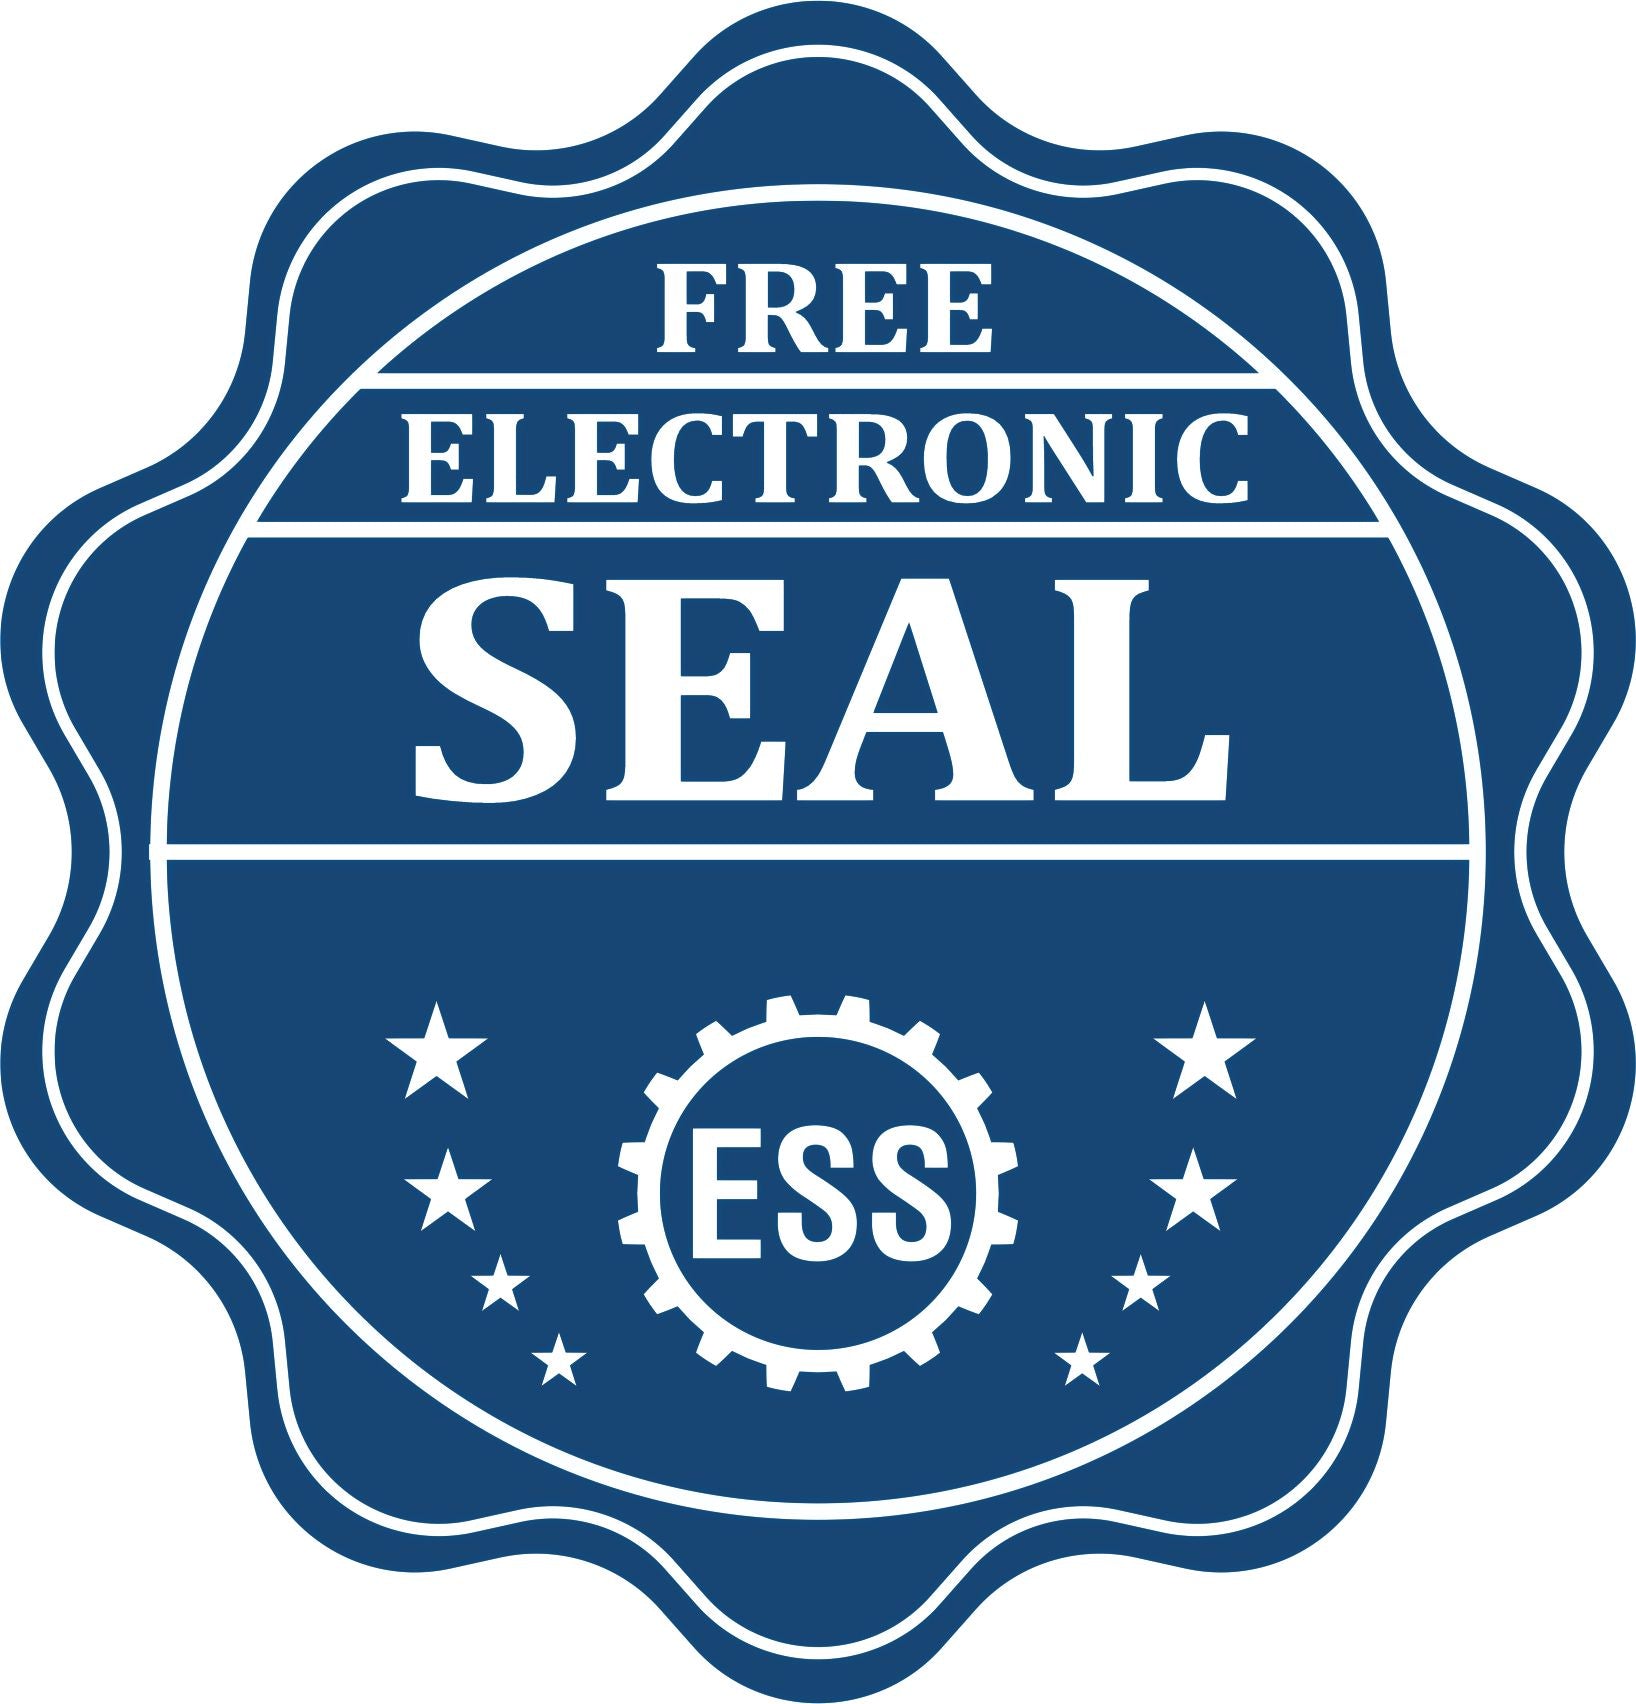 A badge showing a free electronic seal for the Self-Inking New York Landscape Architect Stamp with stars and the ESS gear on the emblem.